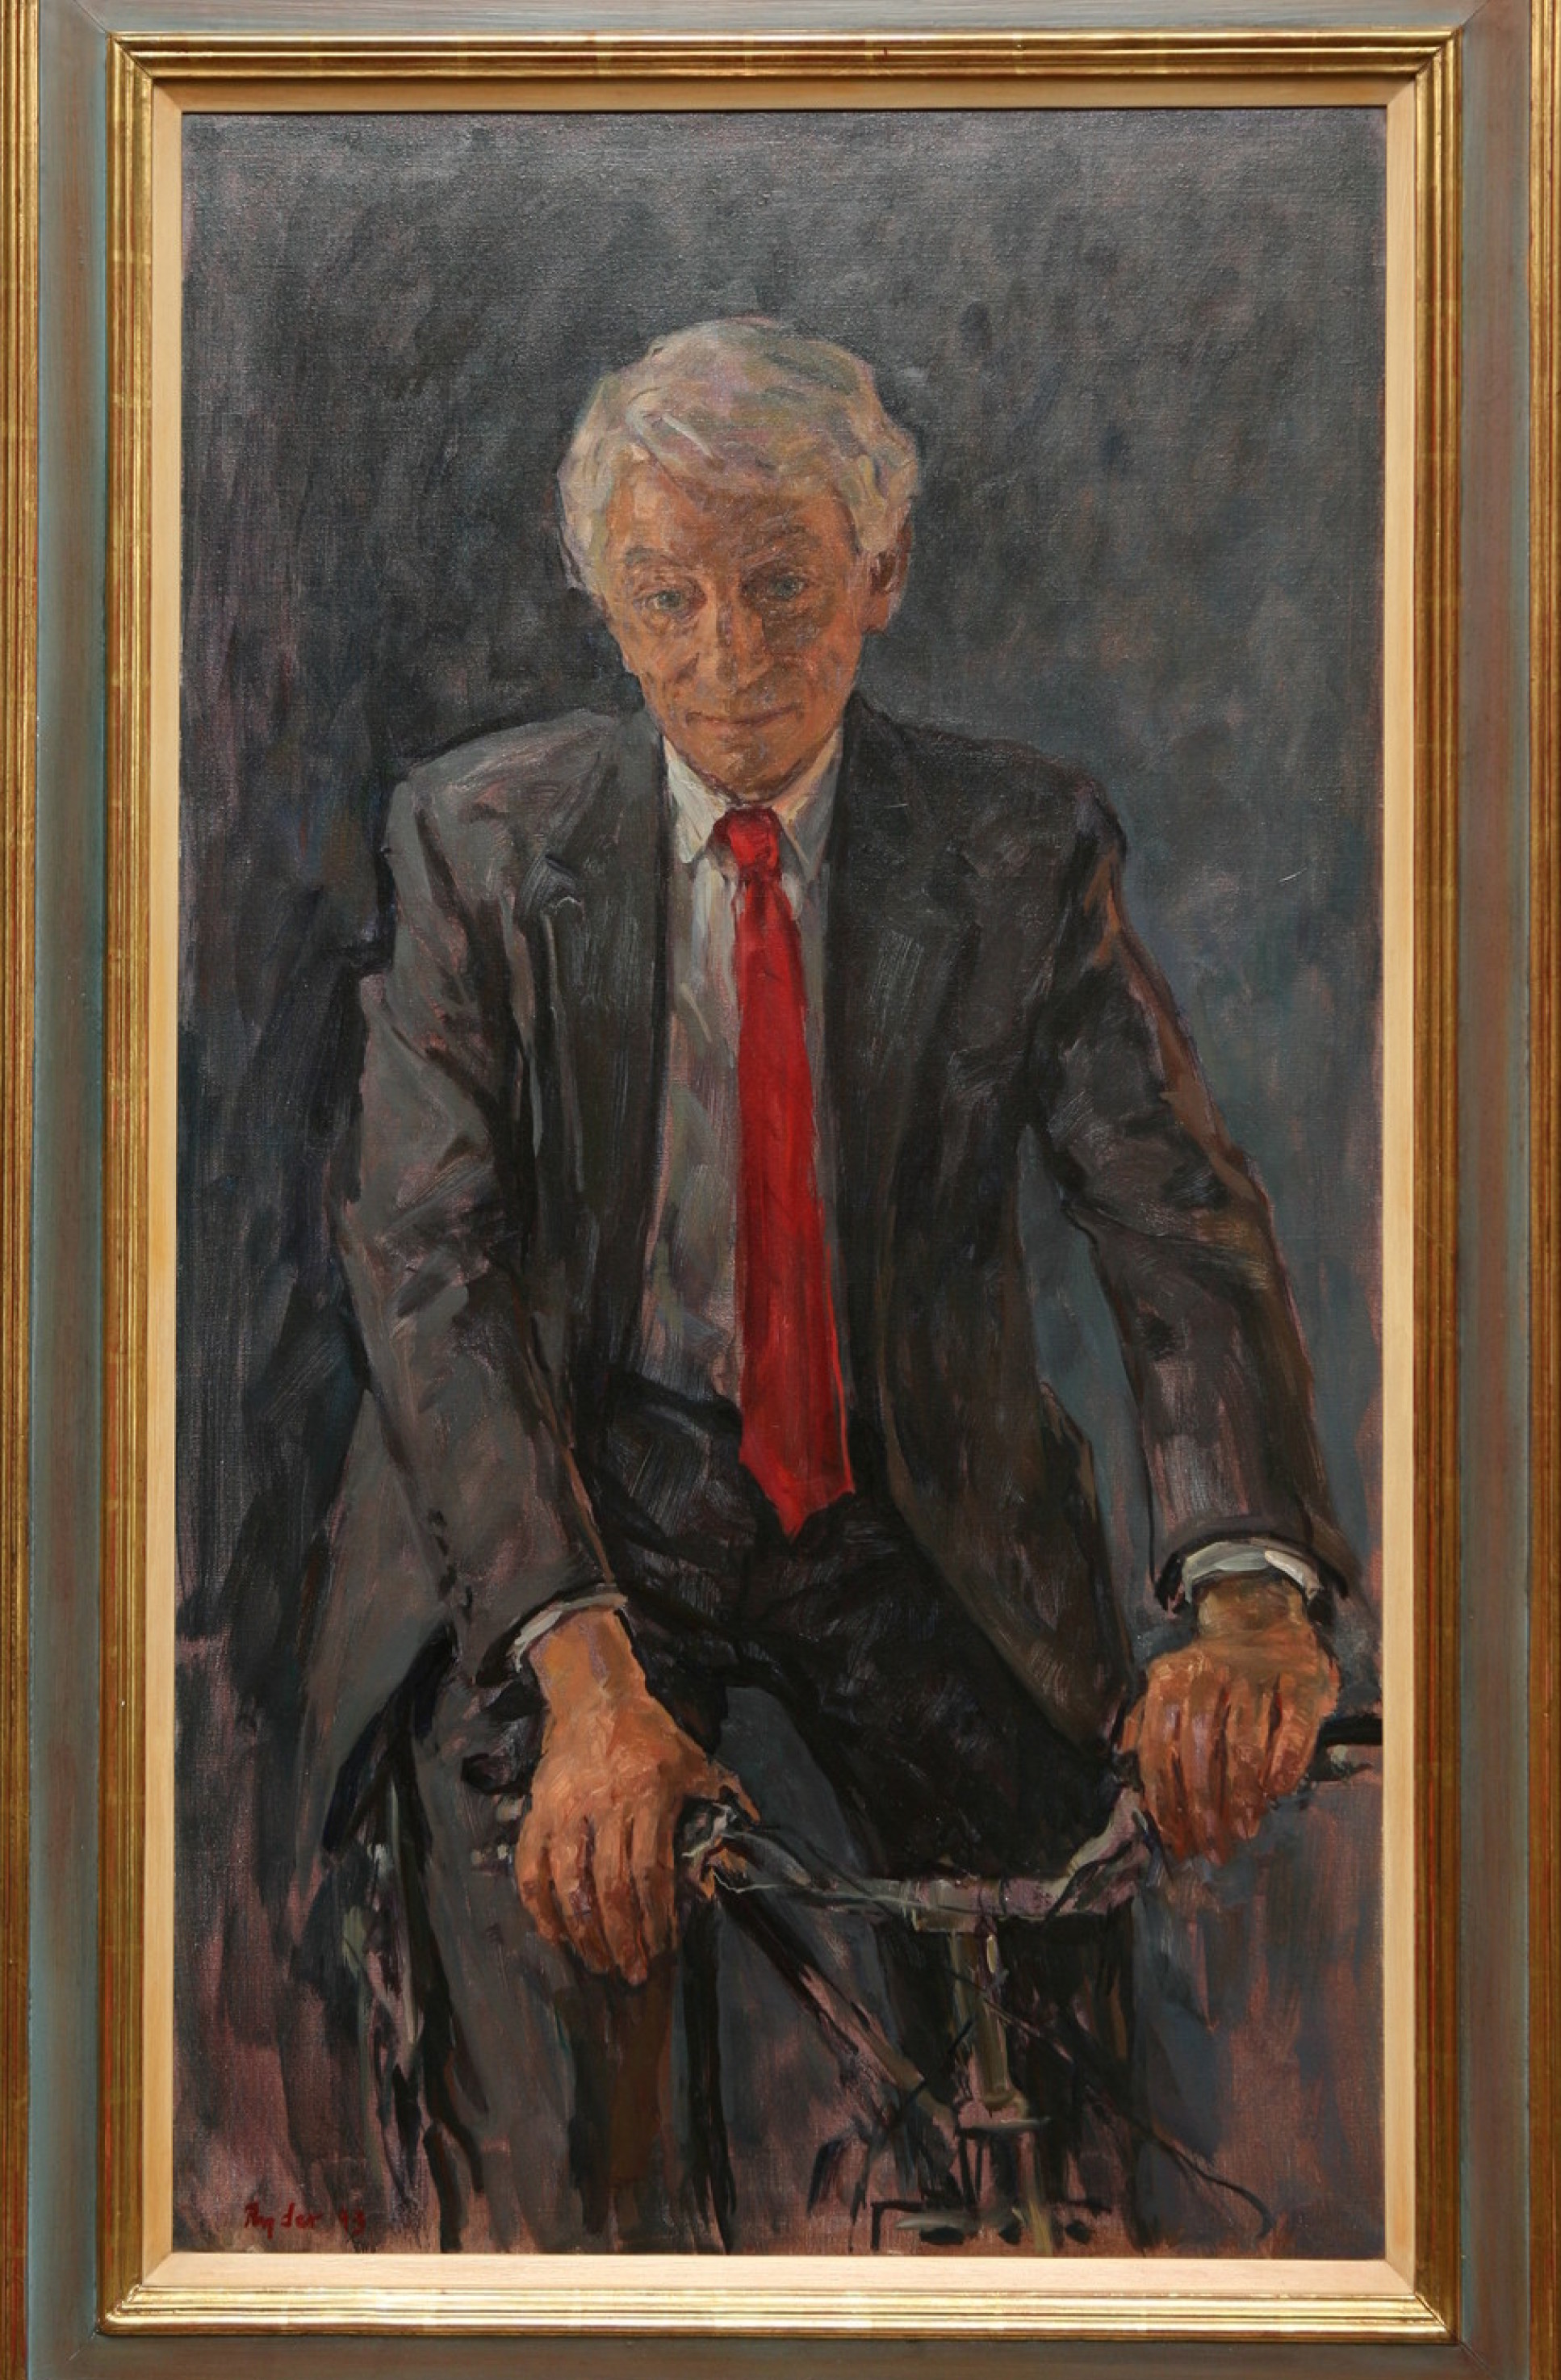 Elderly white man in suit and tie rides bicycle